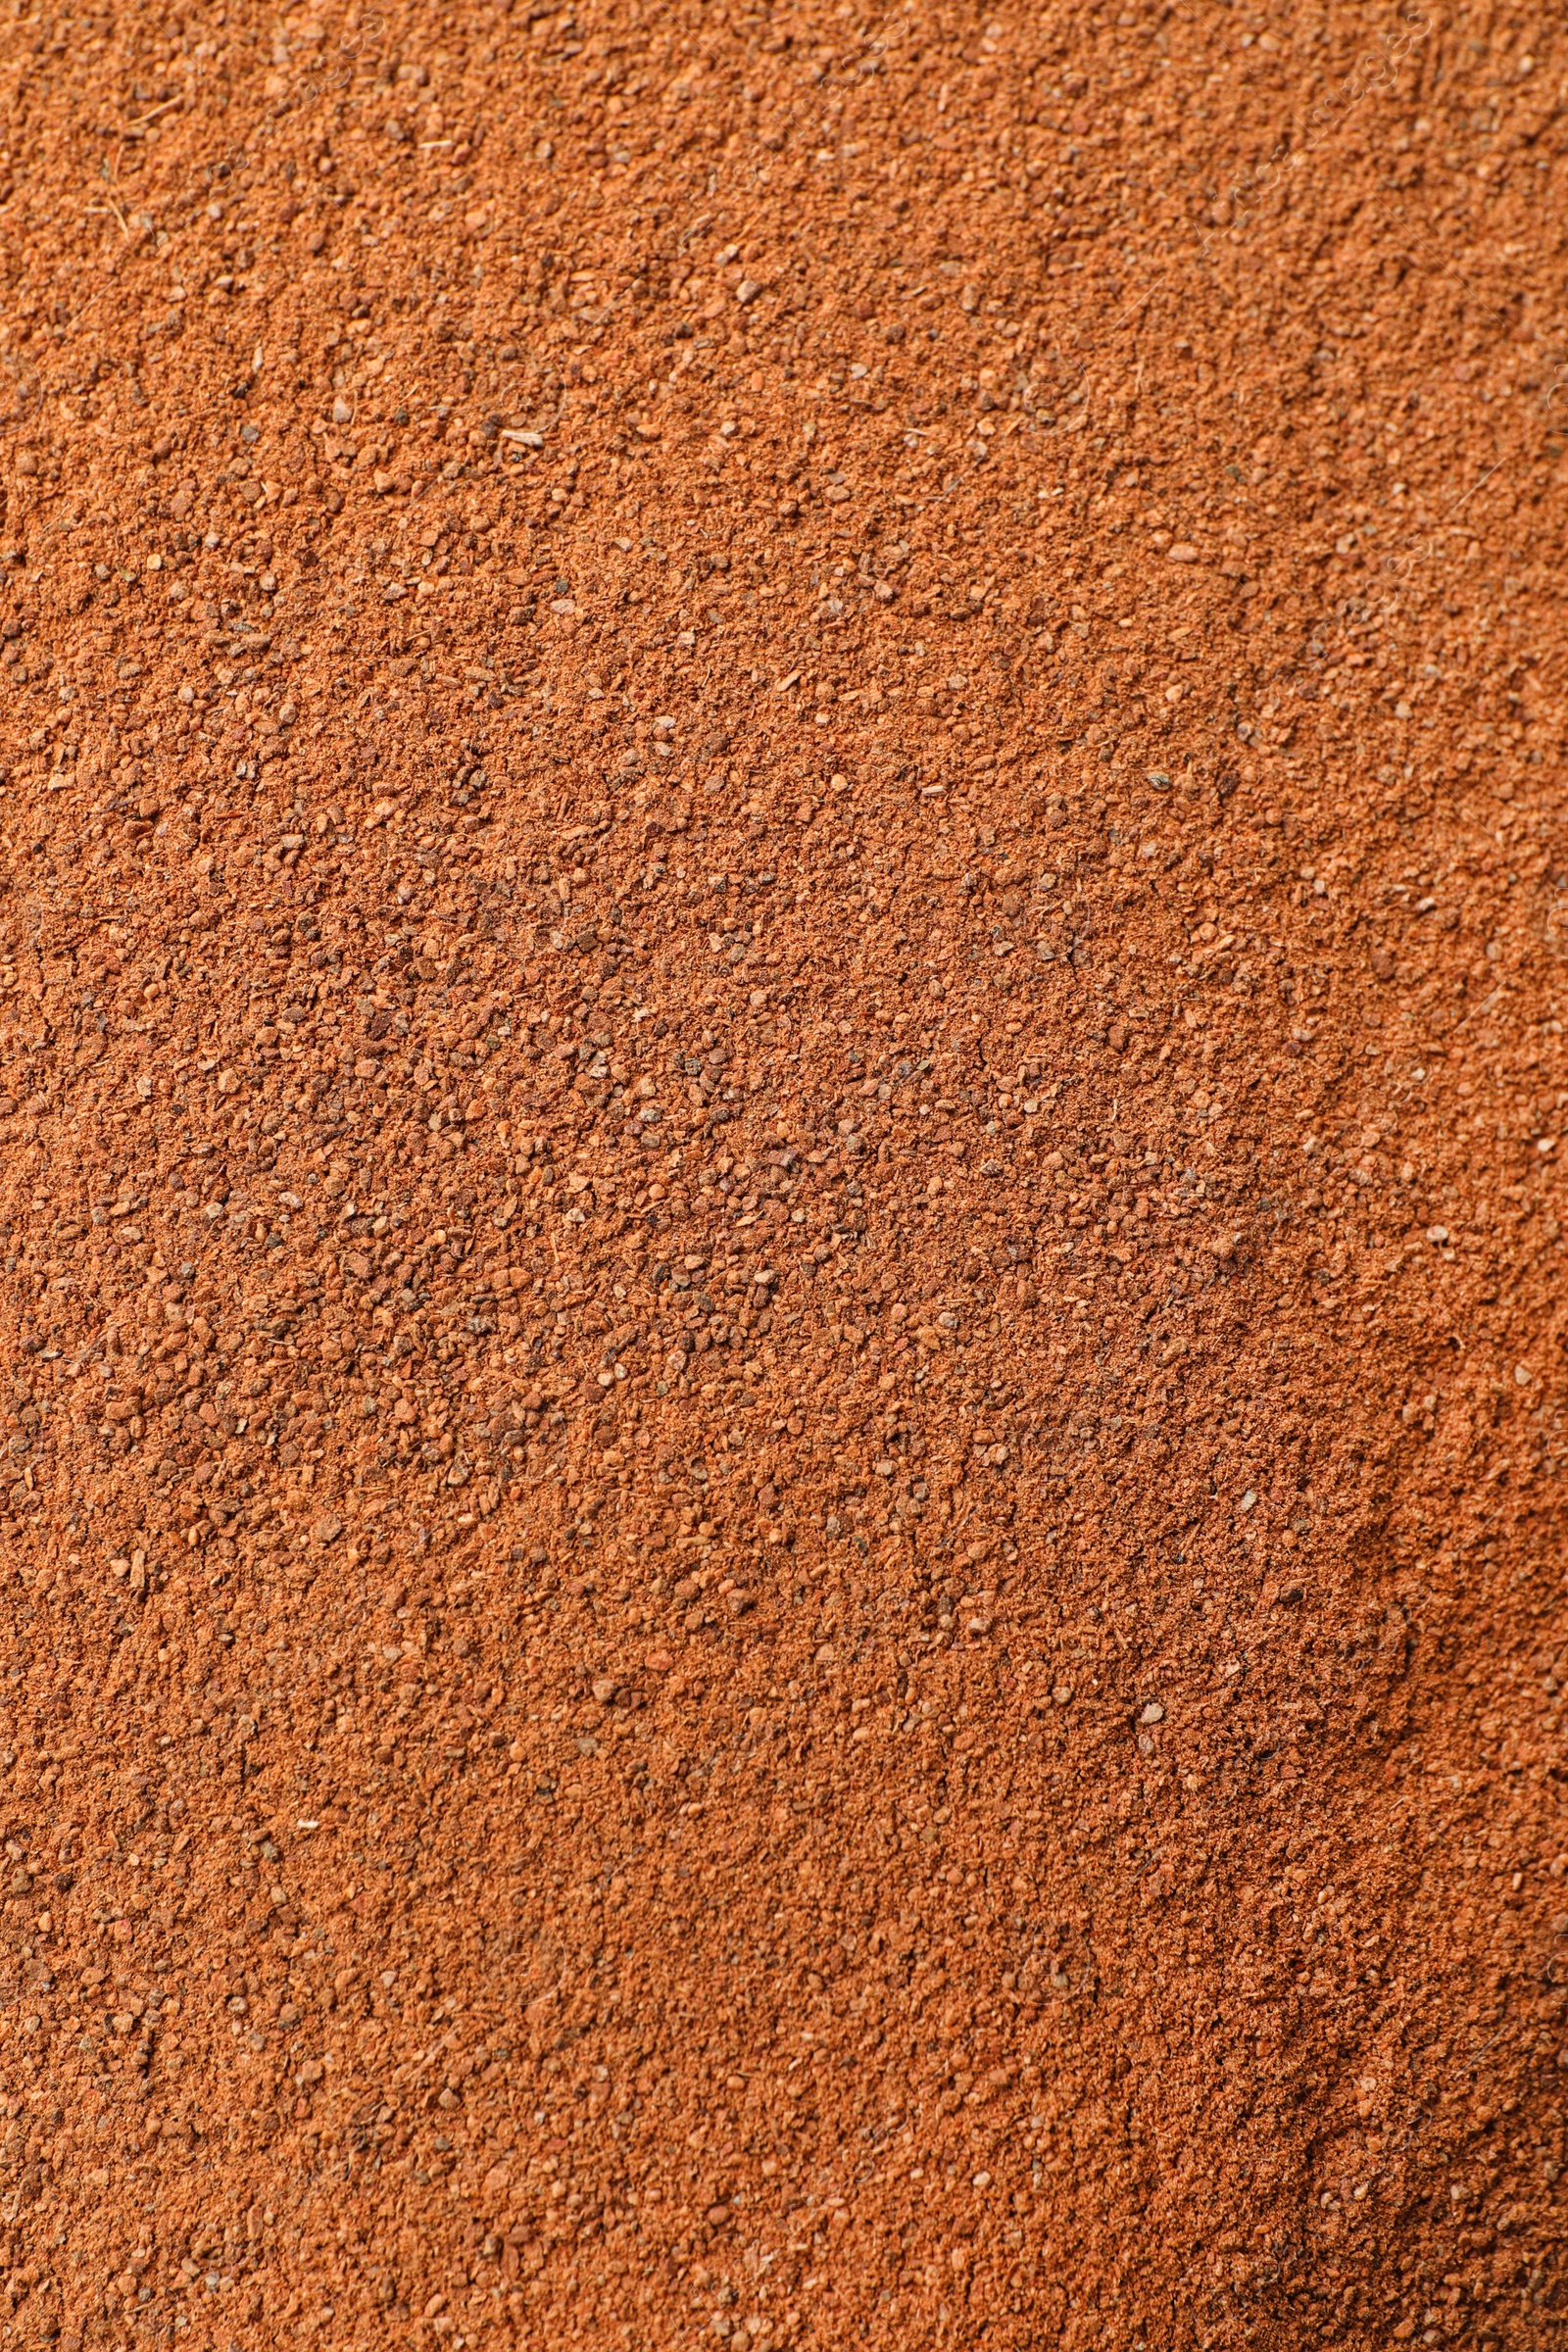 Photo of Aromatic cinnamon powder as background, top view